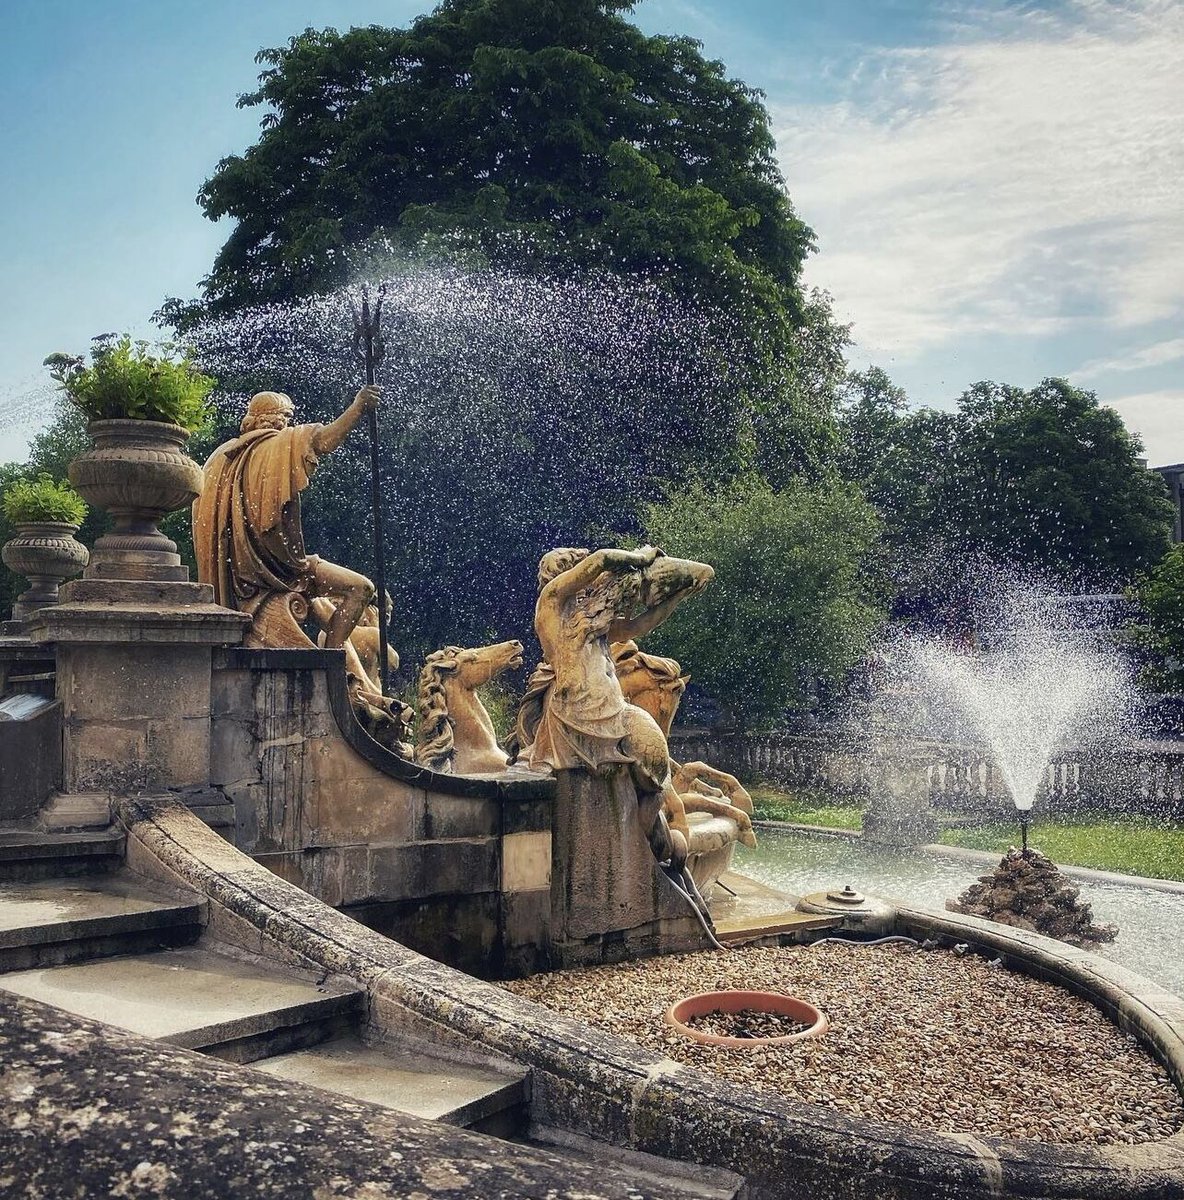 📸 @louscreative_chelt Neptunes Fountain, Cheltenham📍

Don’t forget to use #VisitGlosUK for the chance to be featured!

#Gloucestershire #gloucester #cheltenham